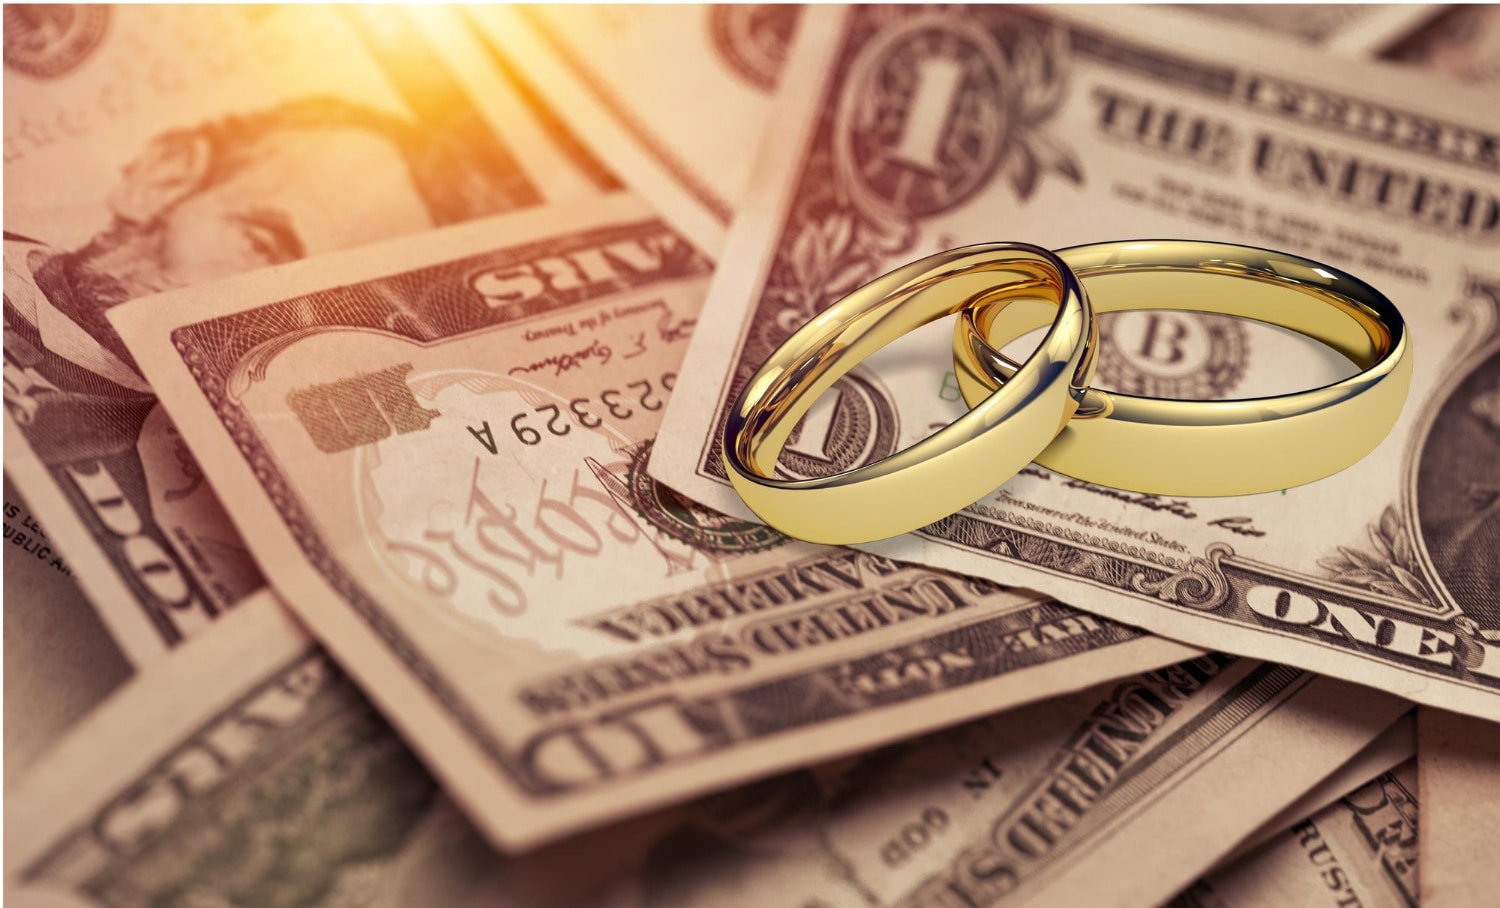 Factors Influencing Alimony Awards in Texas